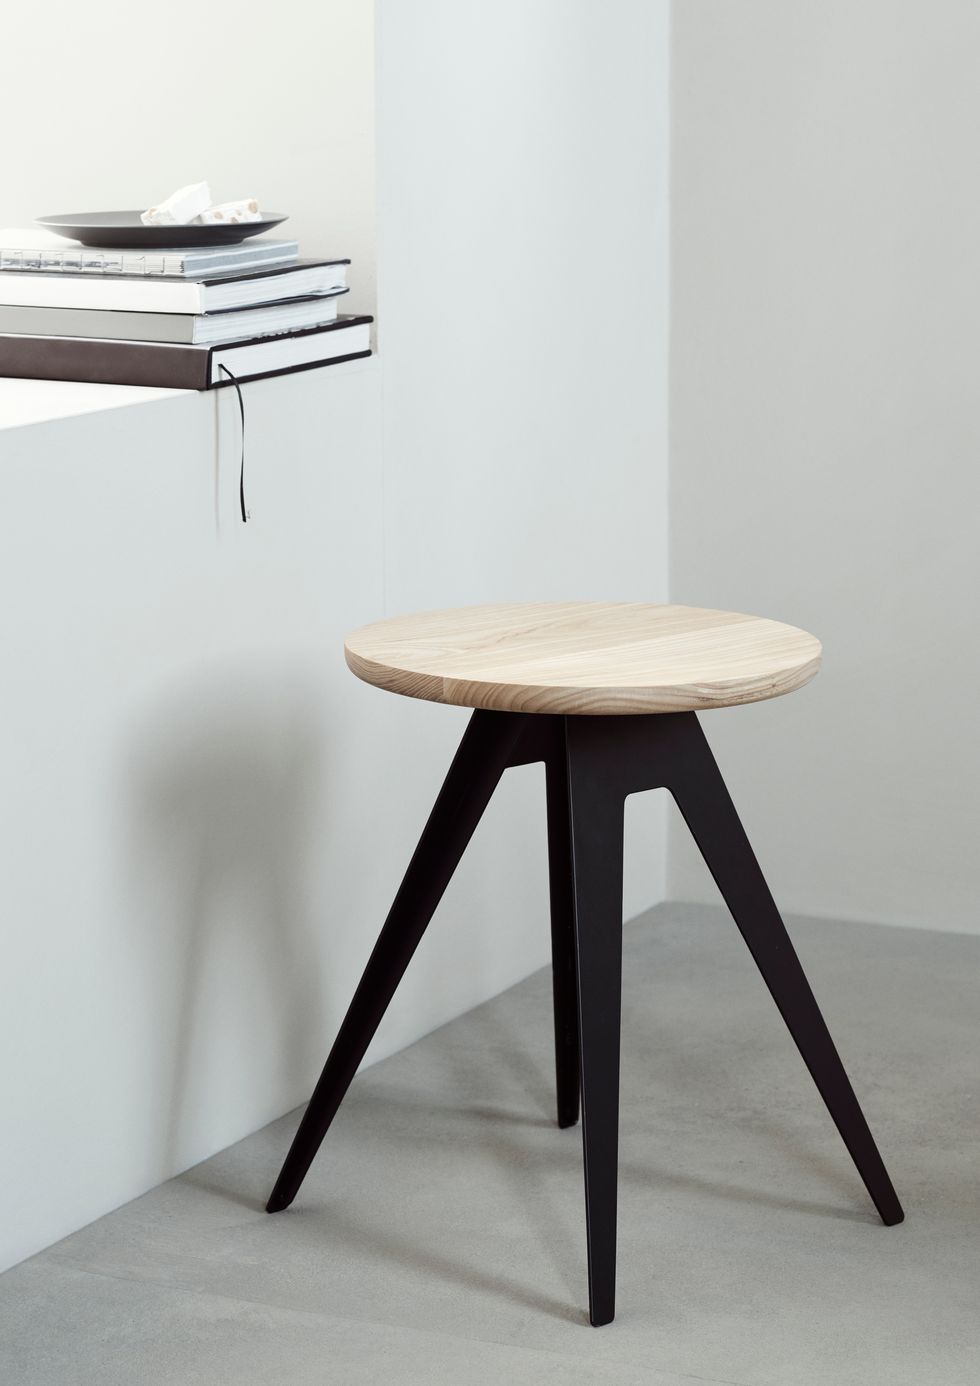 Furniture, Table, Chair, Stool, Bar stool, Design, Interior design, Material property, Plywood, Room, 